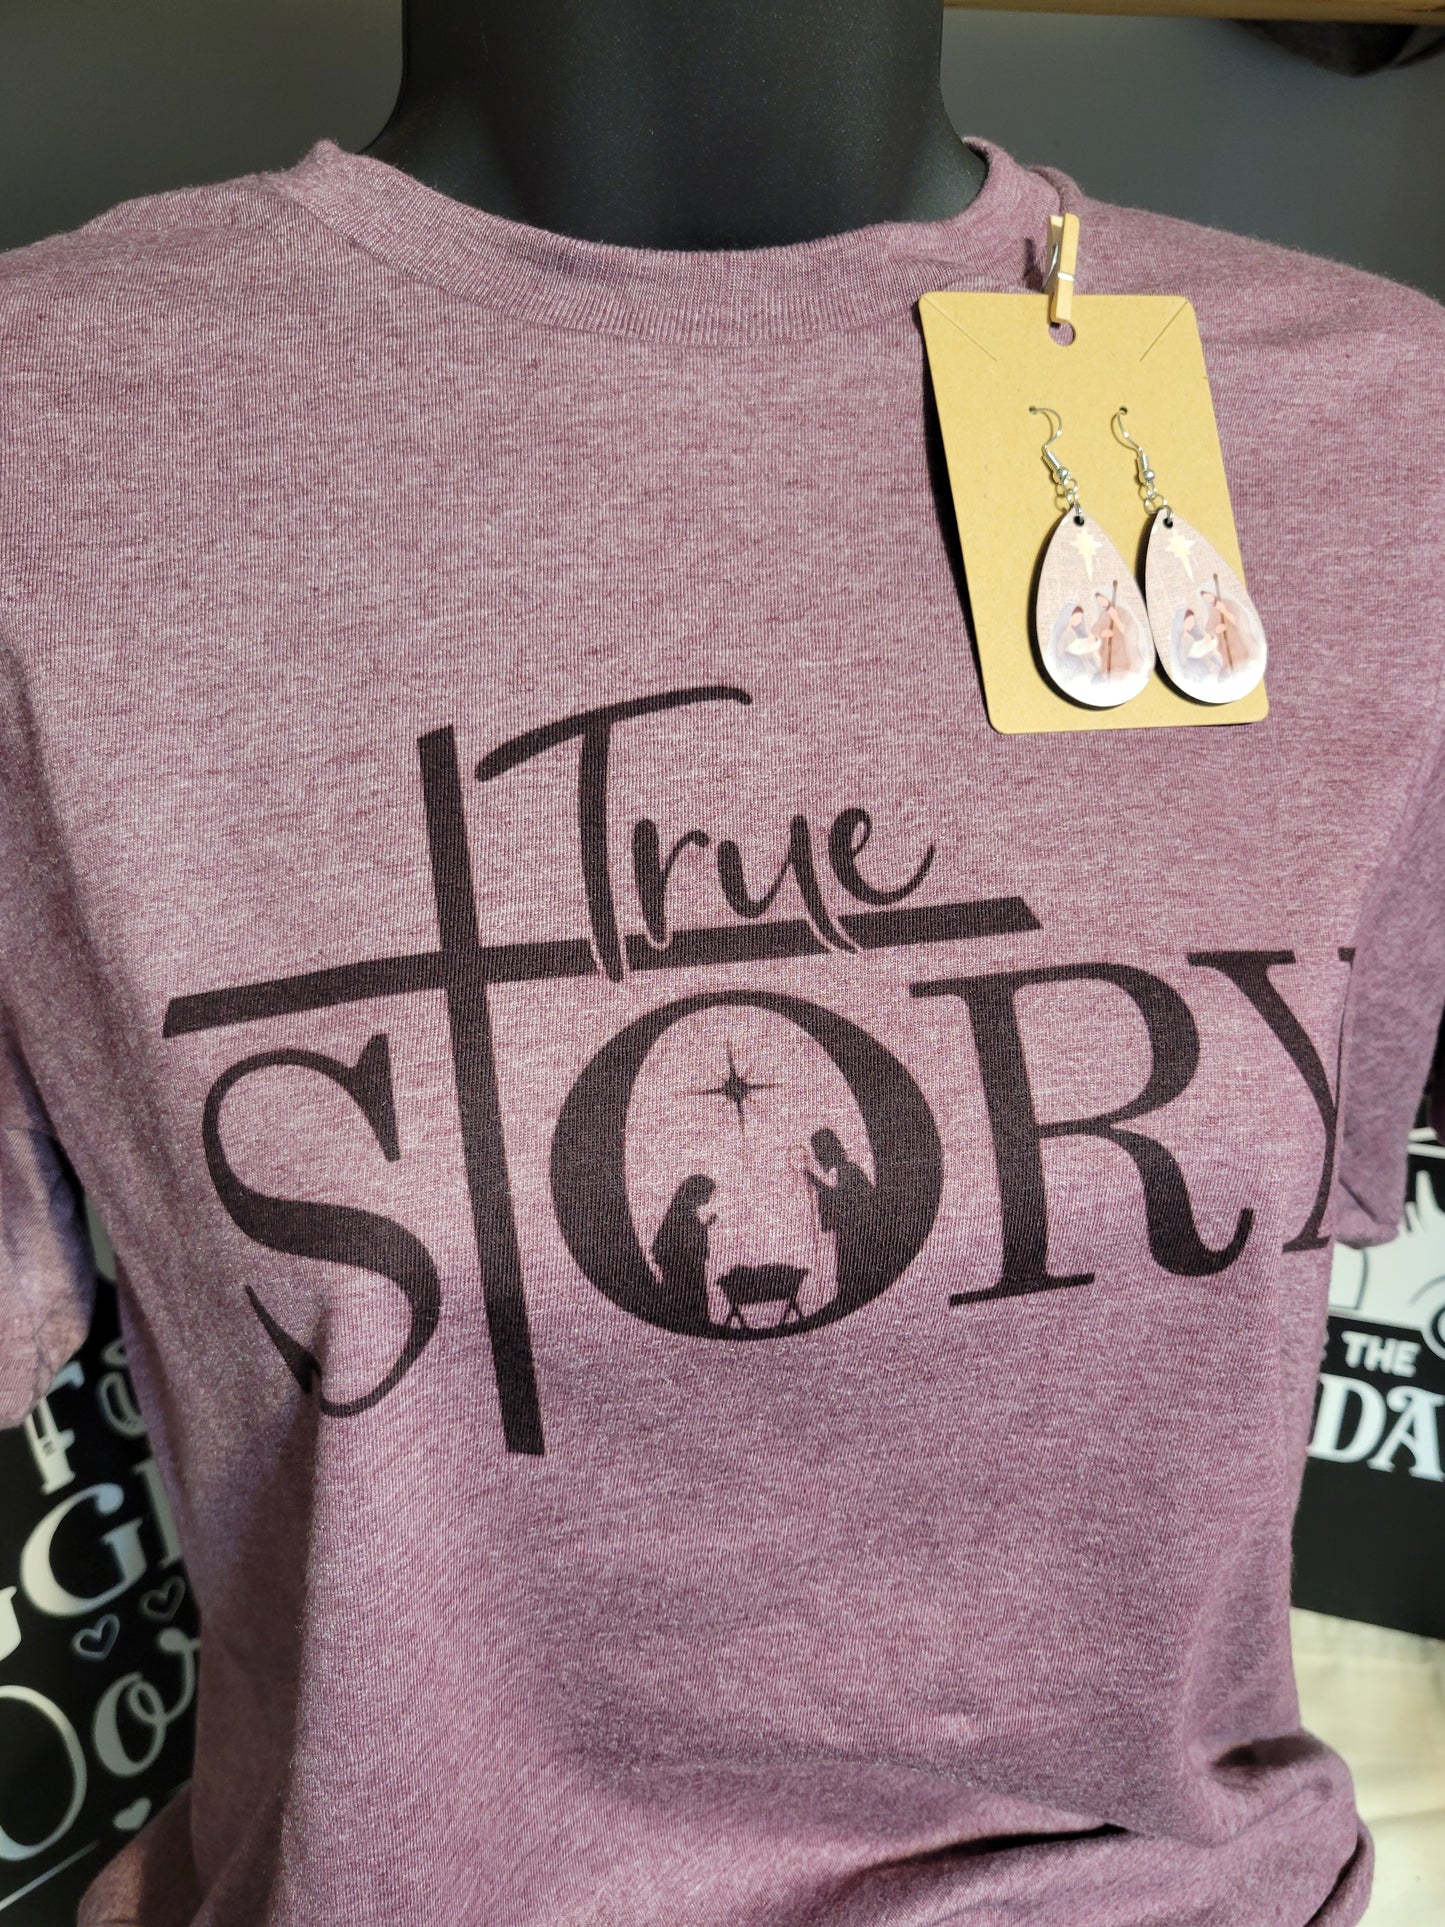 True Story t-shirt with matching earrings